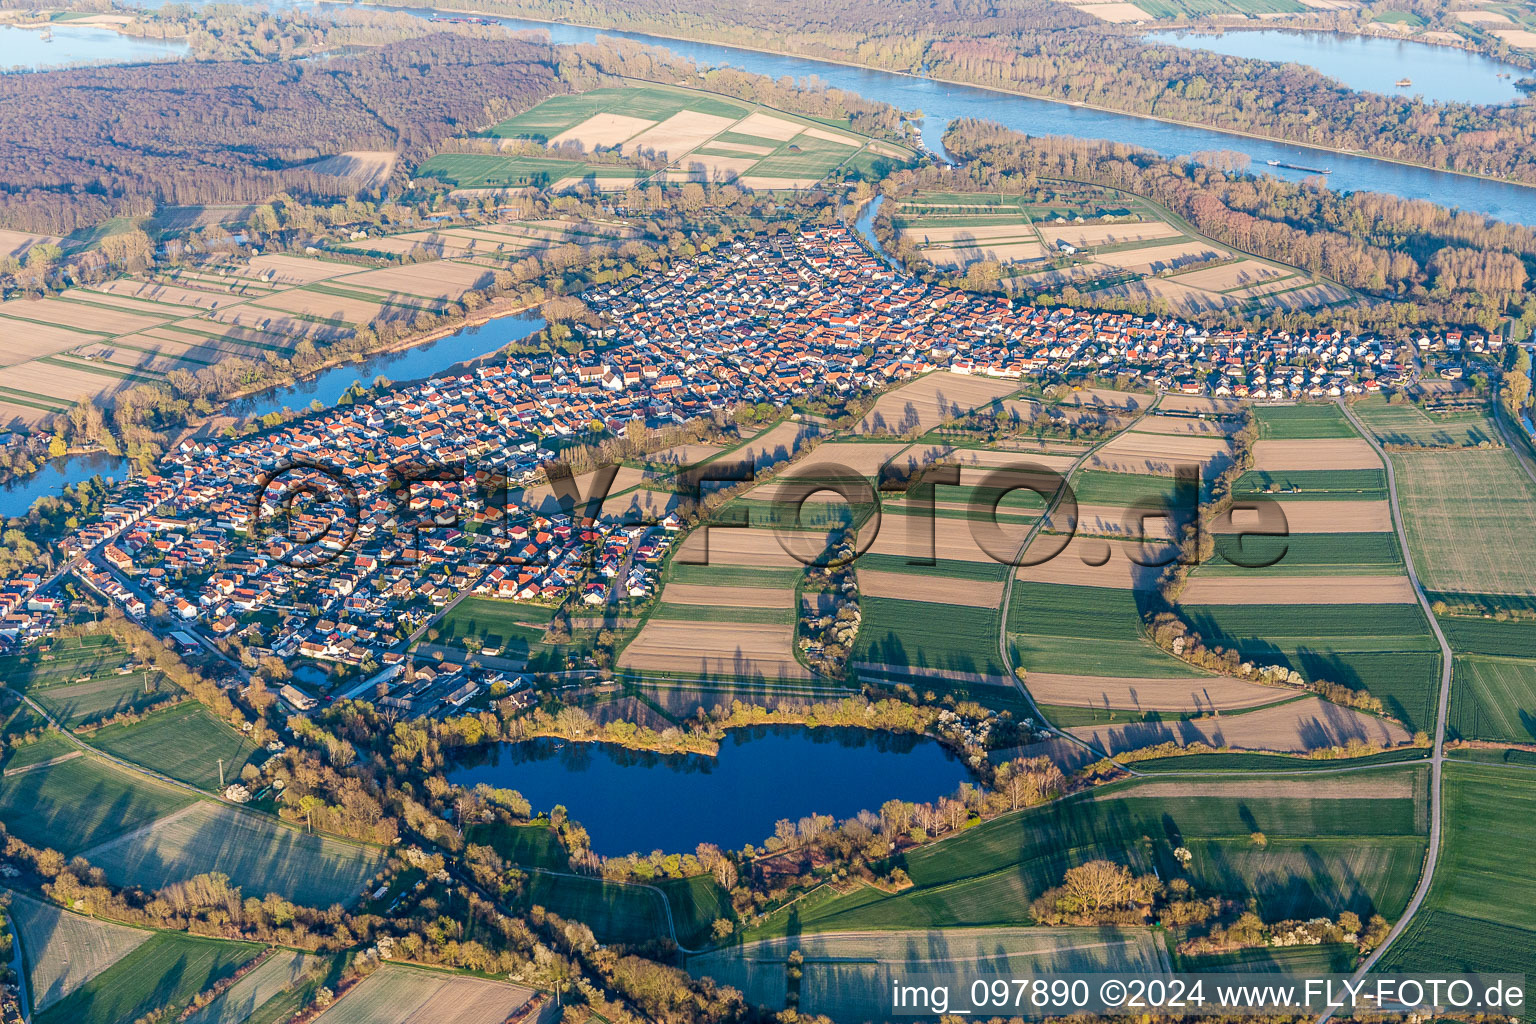 Village on the river bank areas of the Rhine river in Neuburg am Rhein in the state Rhineland-Palatinate, Germany